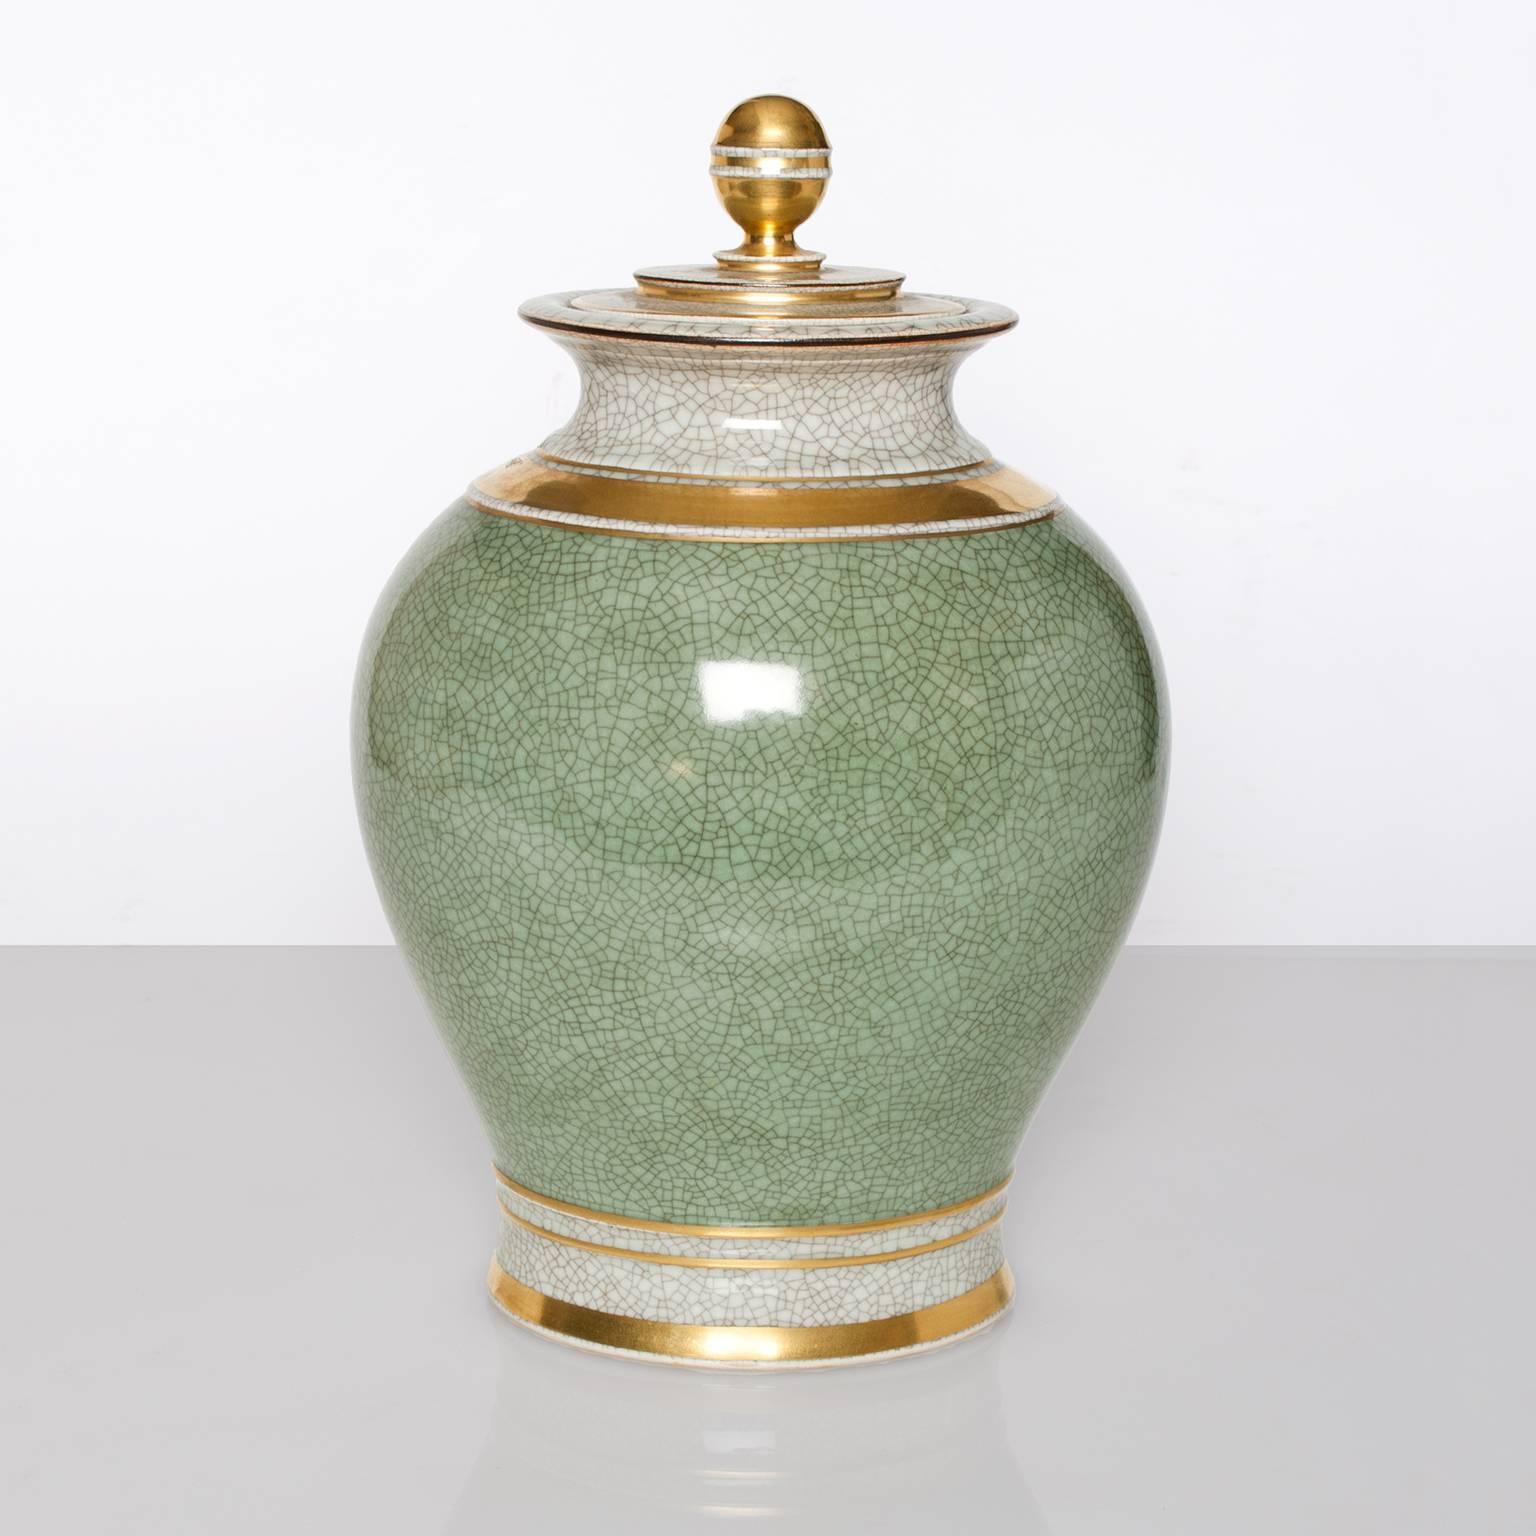 Scandinavian Modern large oval form Royal Copenhagen ceramic vase in green and white (craquelure) crackle glaze and detailed in gold. Made in Denmark, circa 1940s.
 
Measures: Height 13.5